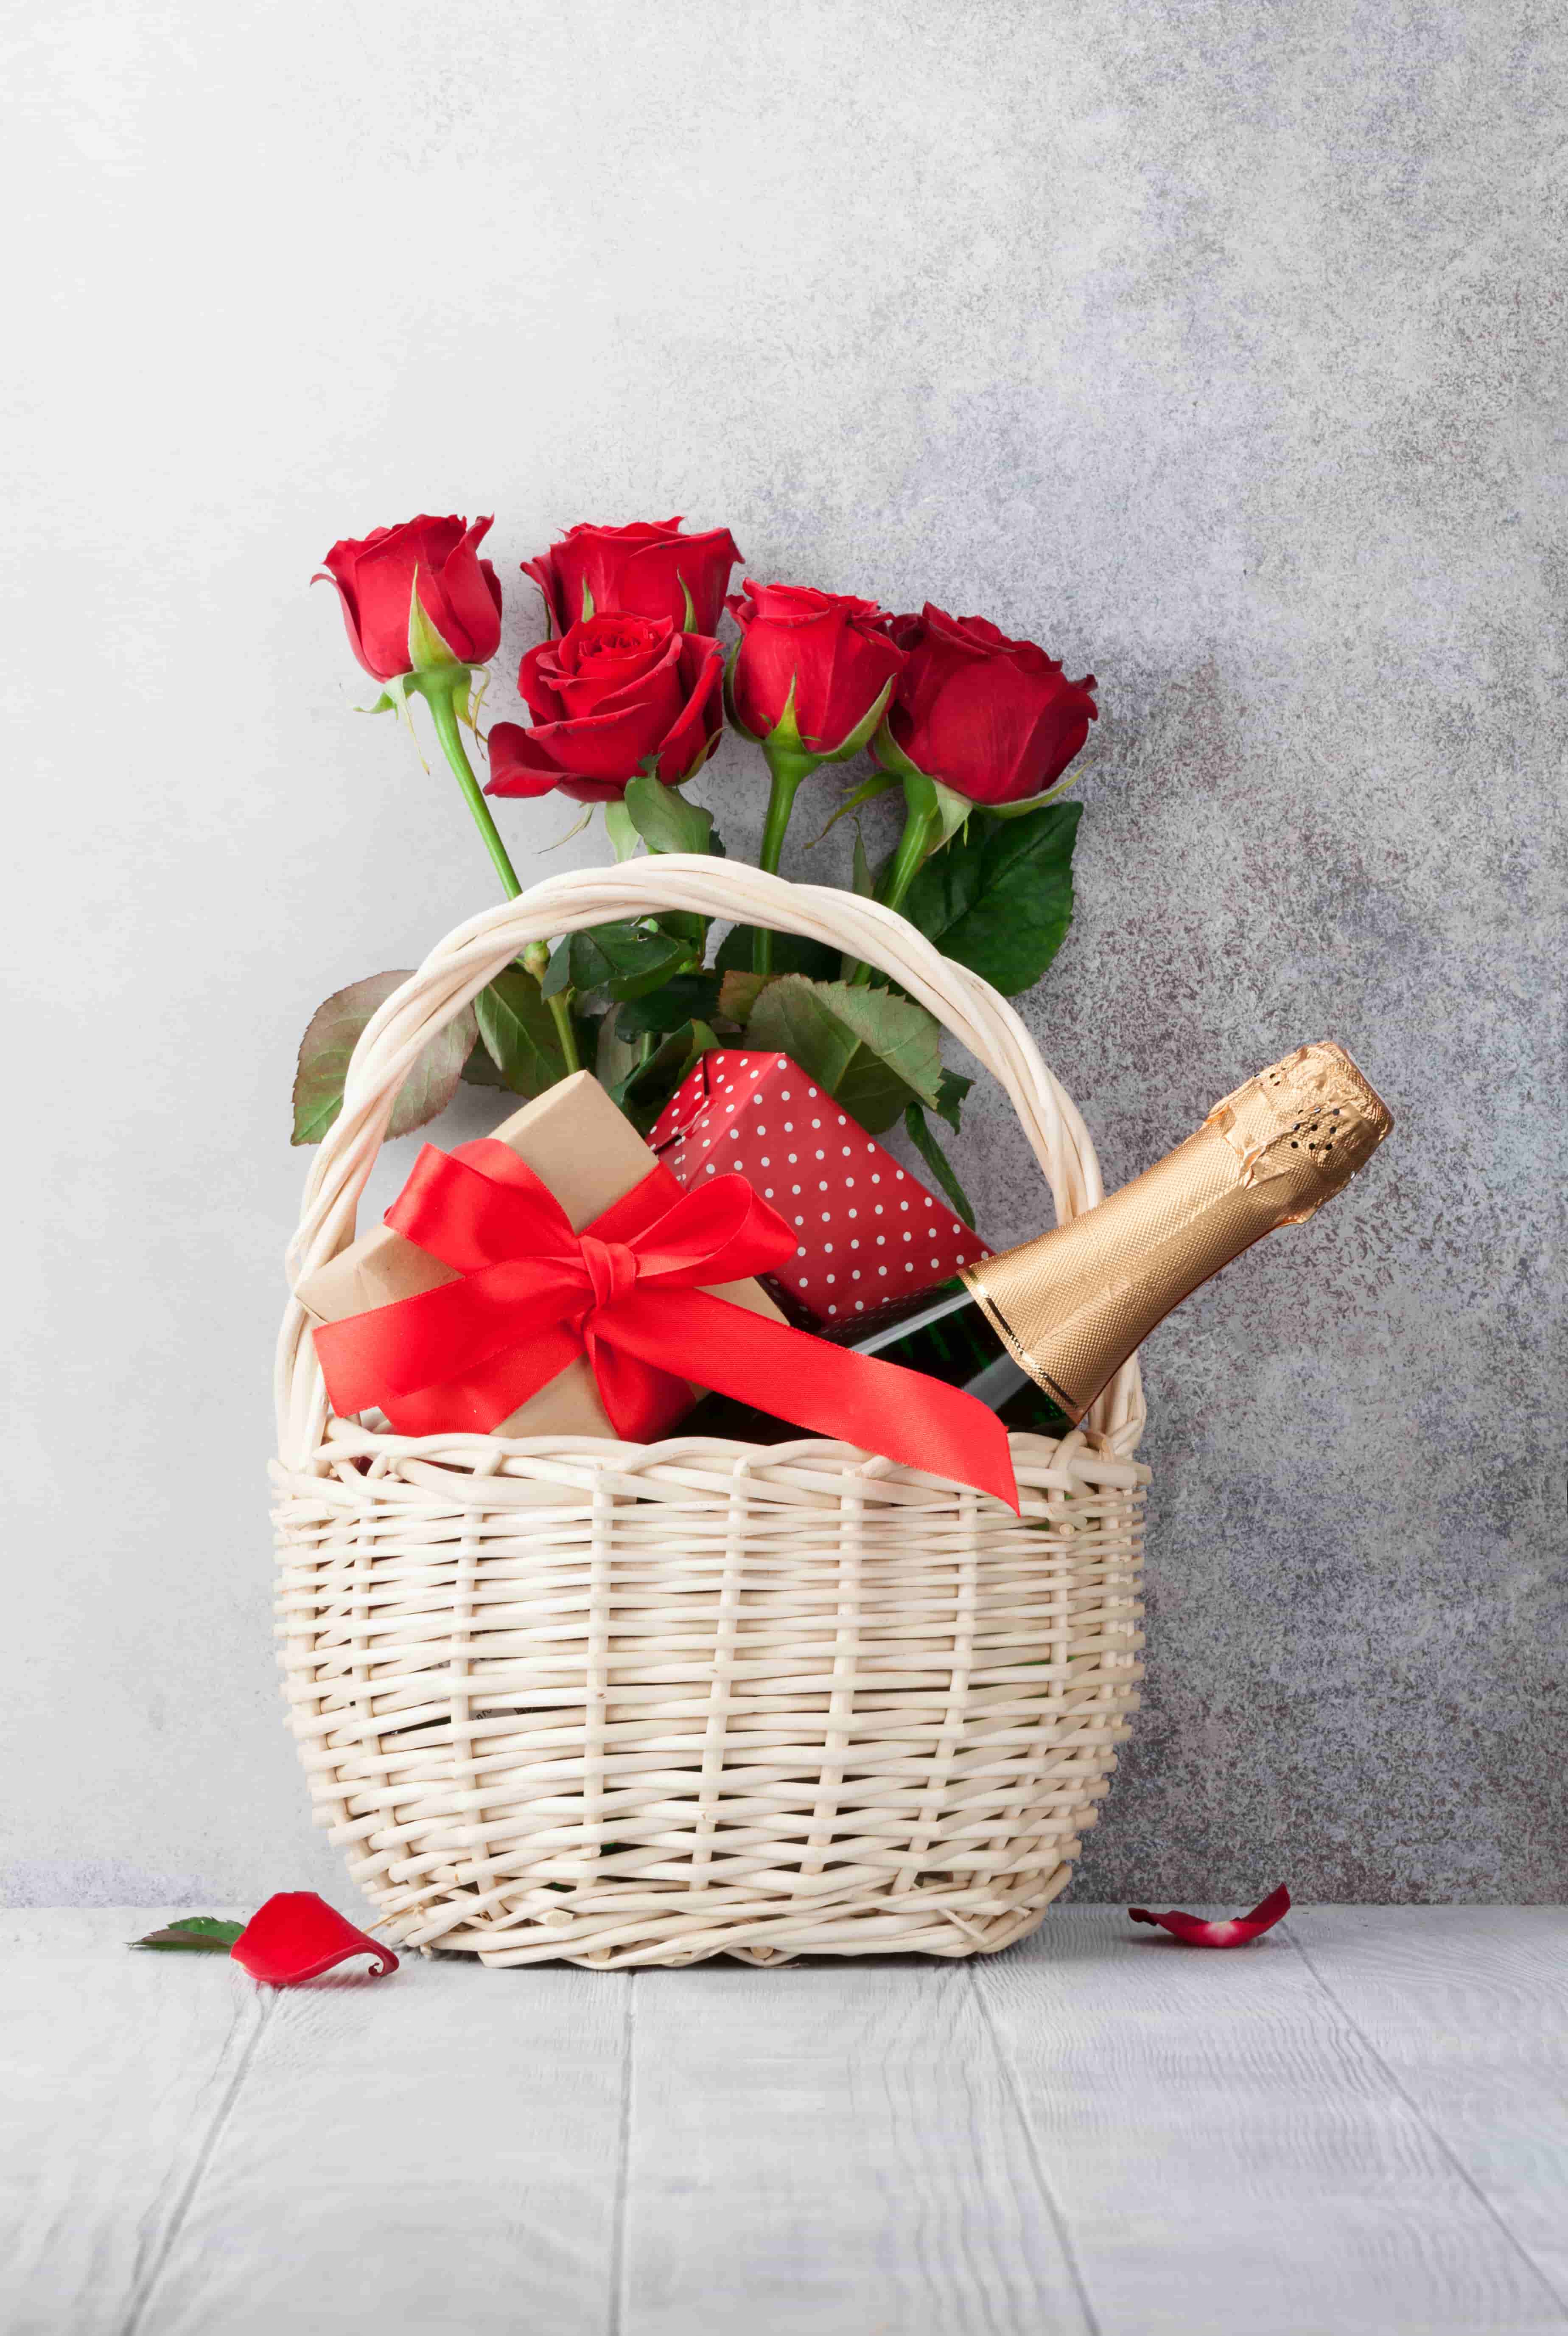 champagne gifts and Roses images